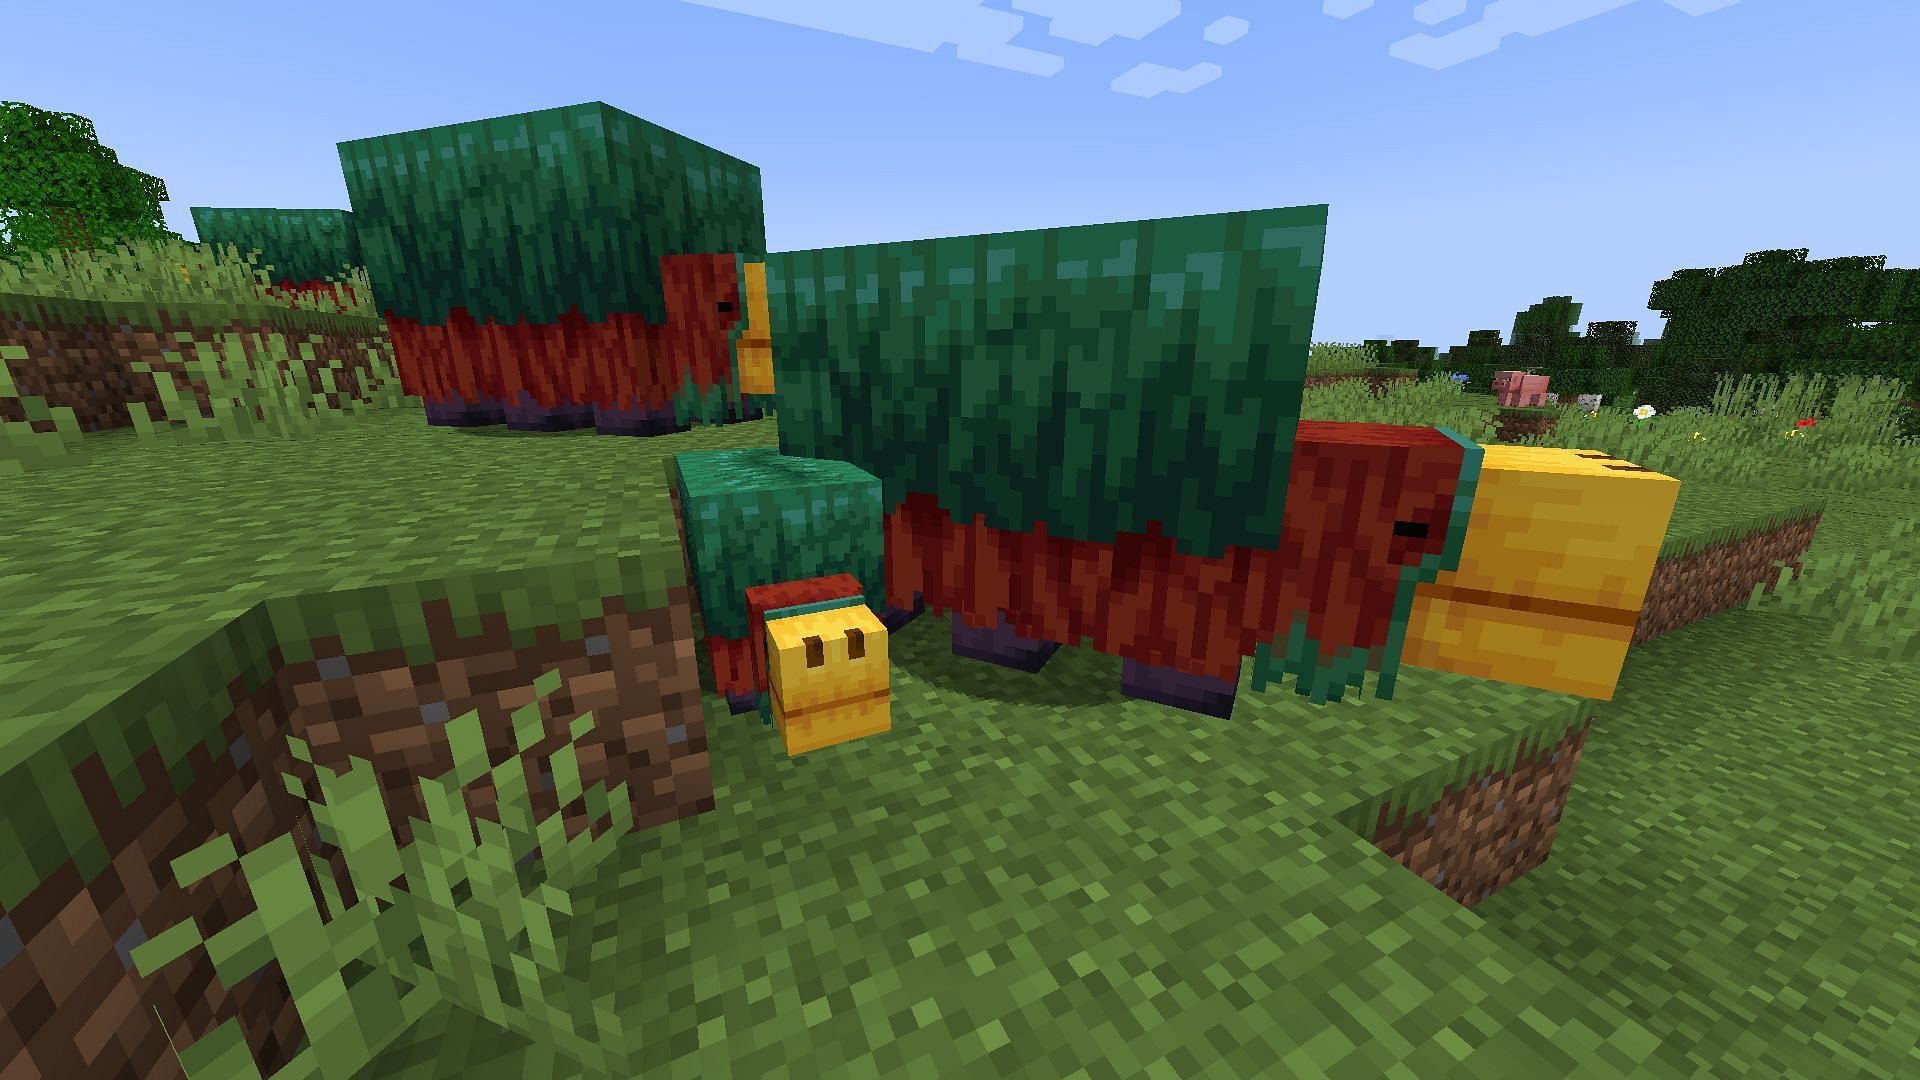 Sniffers farming might be manual, but it can be quite easy in Minecraft (Image via Mojang)